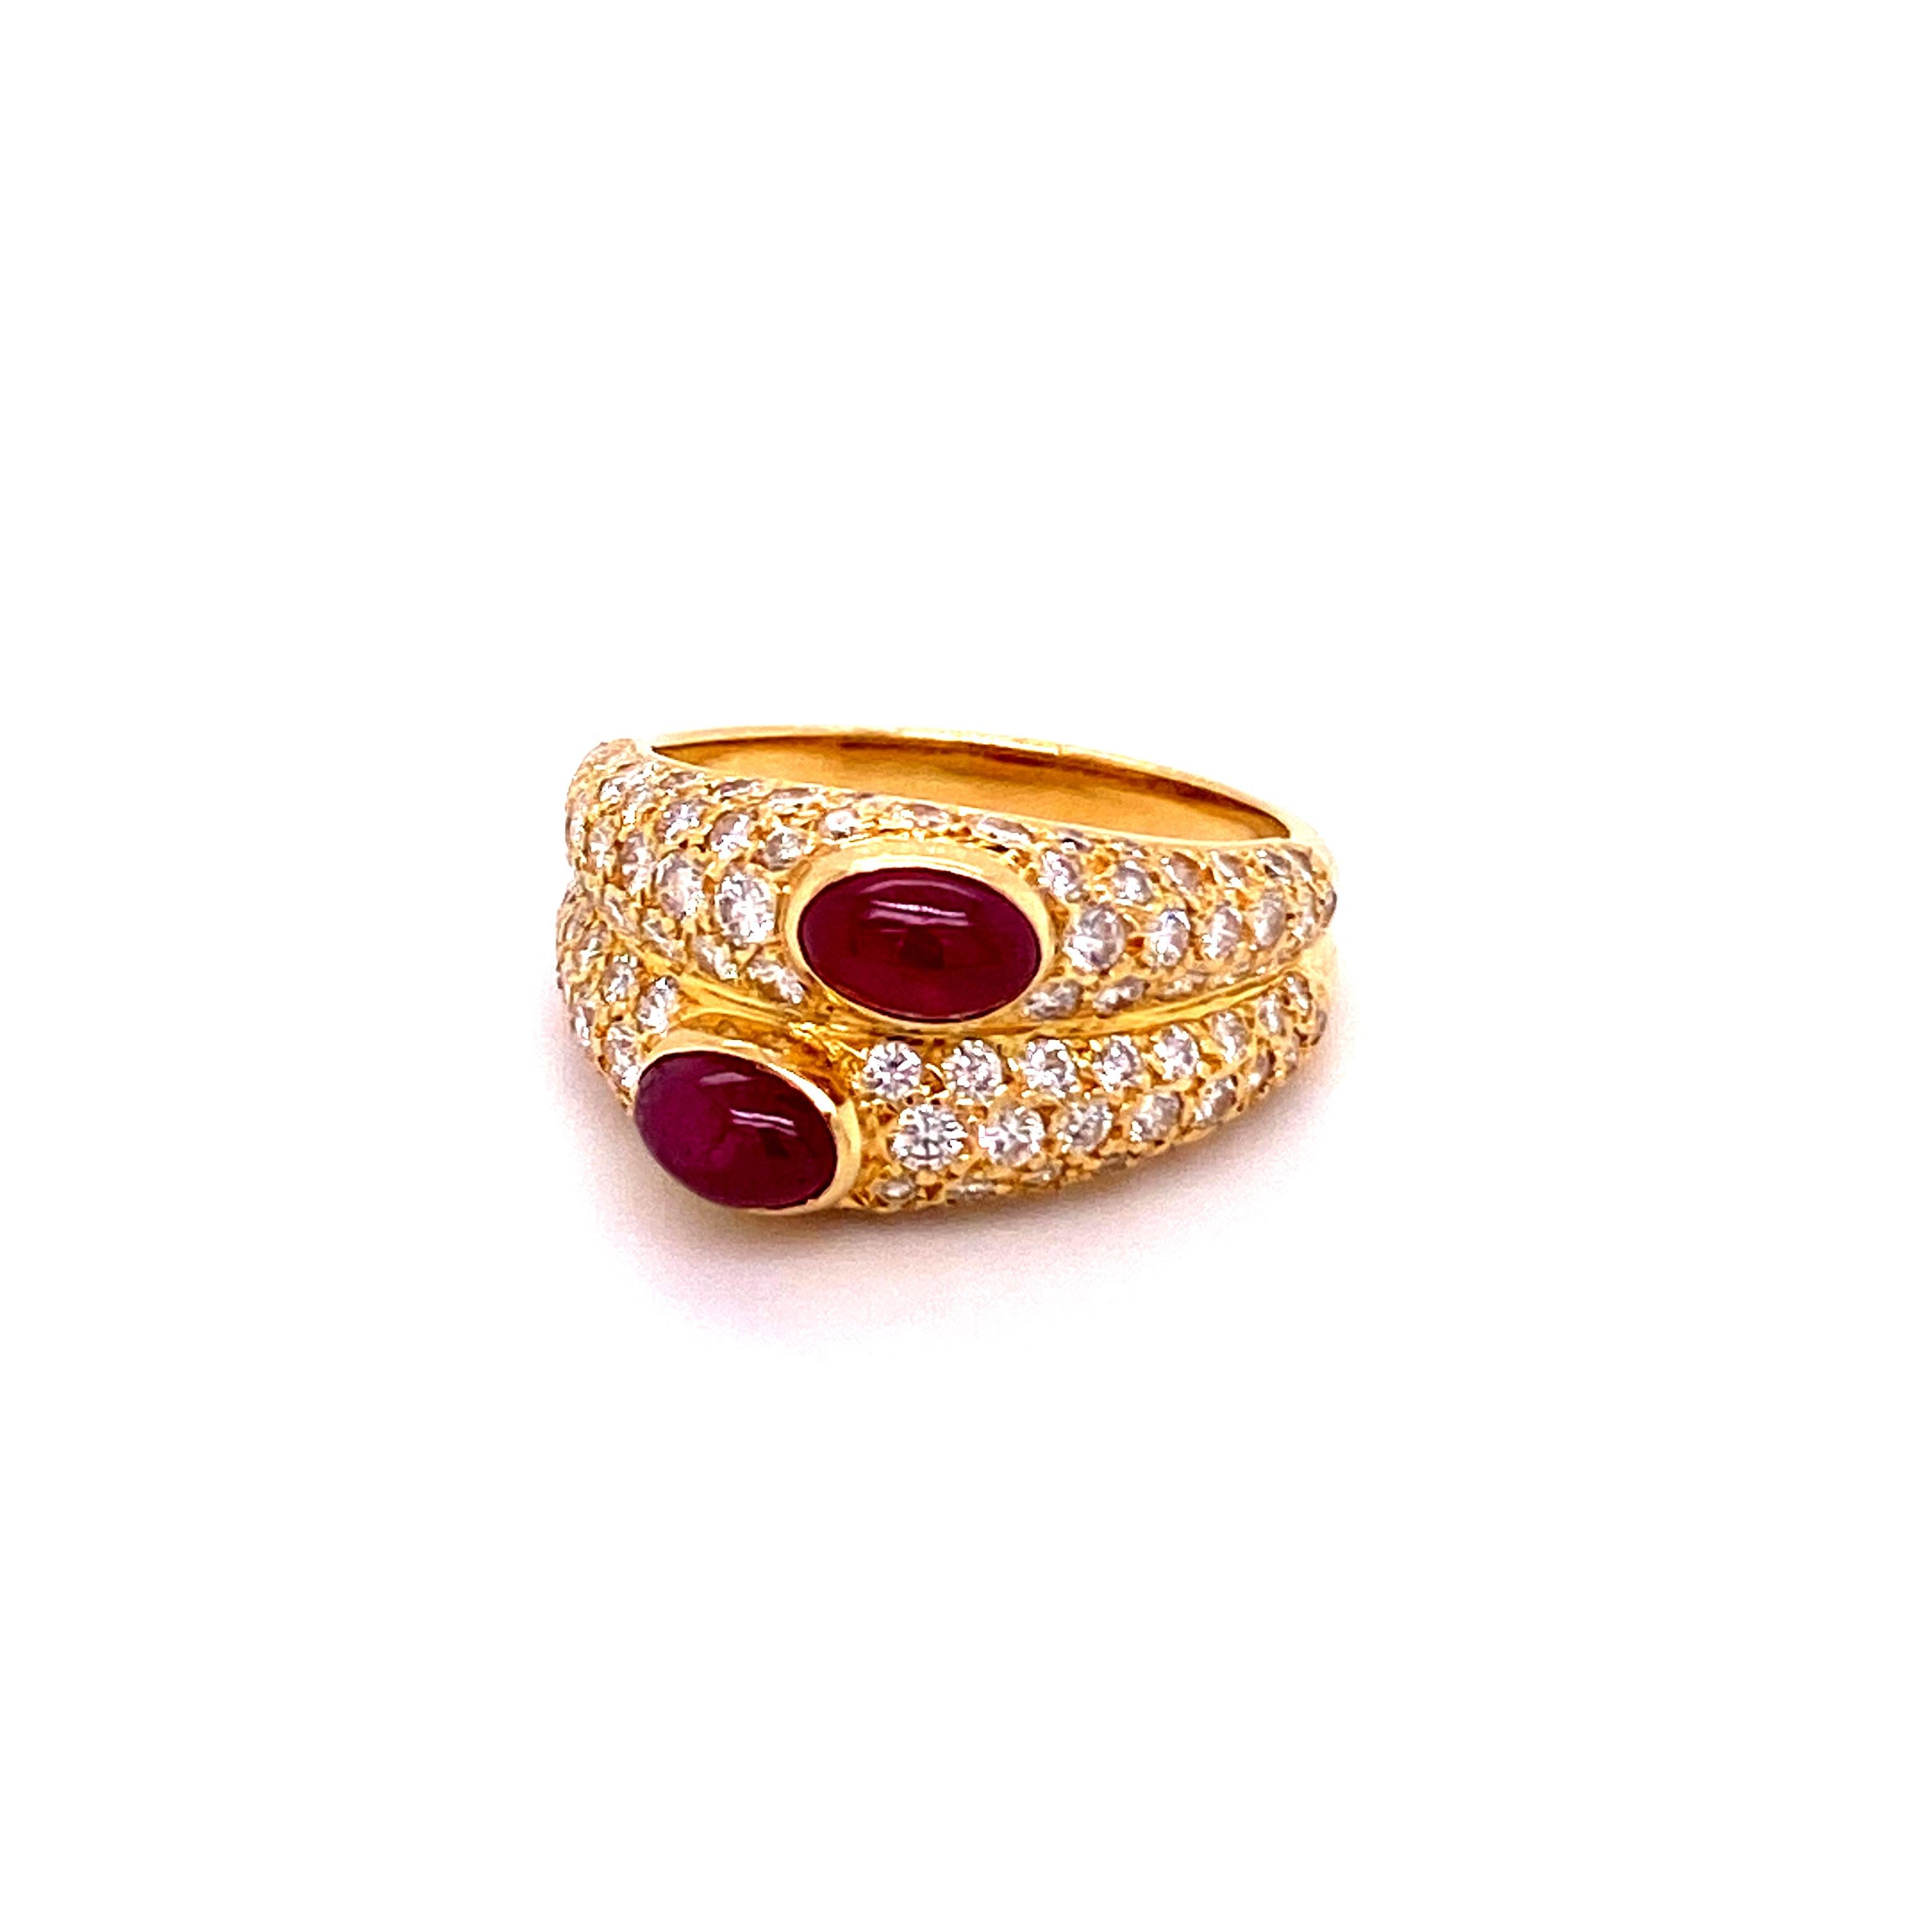 This superb ring by Cartier Paris features two oblong cabochon cut rubies of a lively and intense red color. Total weight of the rubies approximately 1.20 carats. Beautifully crafted mounting in 18 karat yellow gold, set with 100 brilliant cut